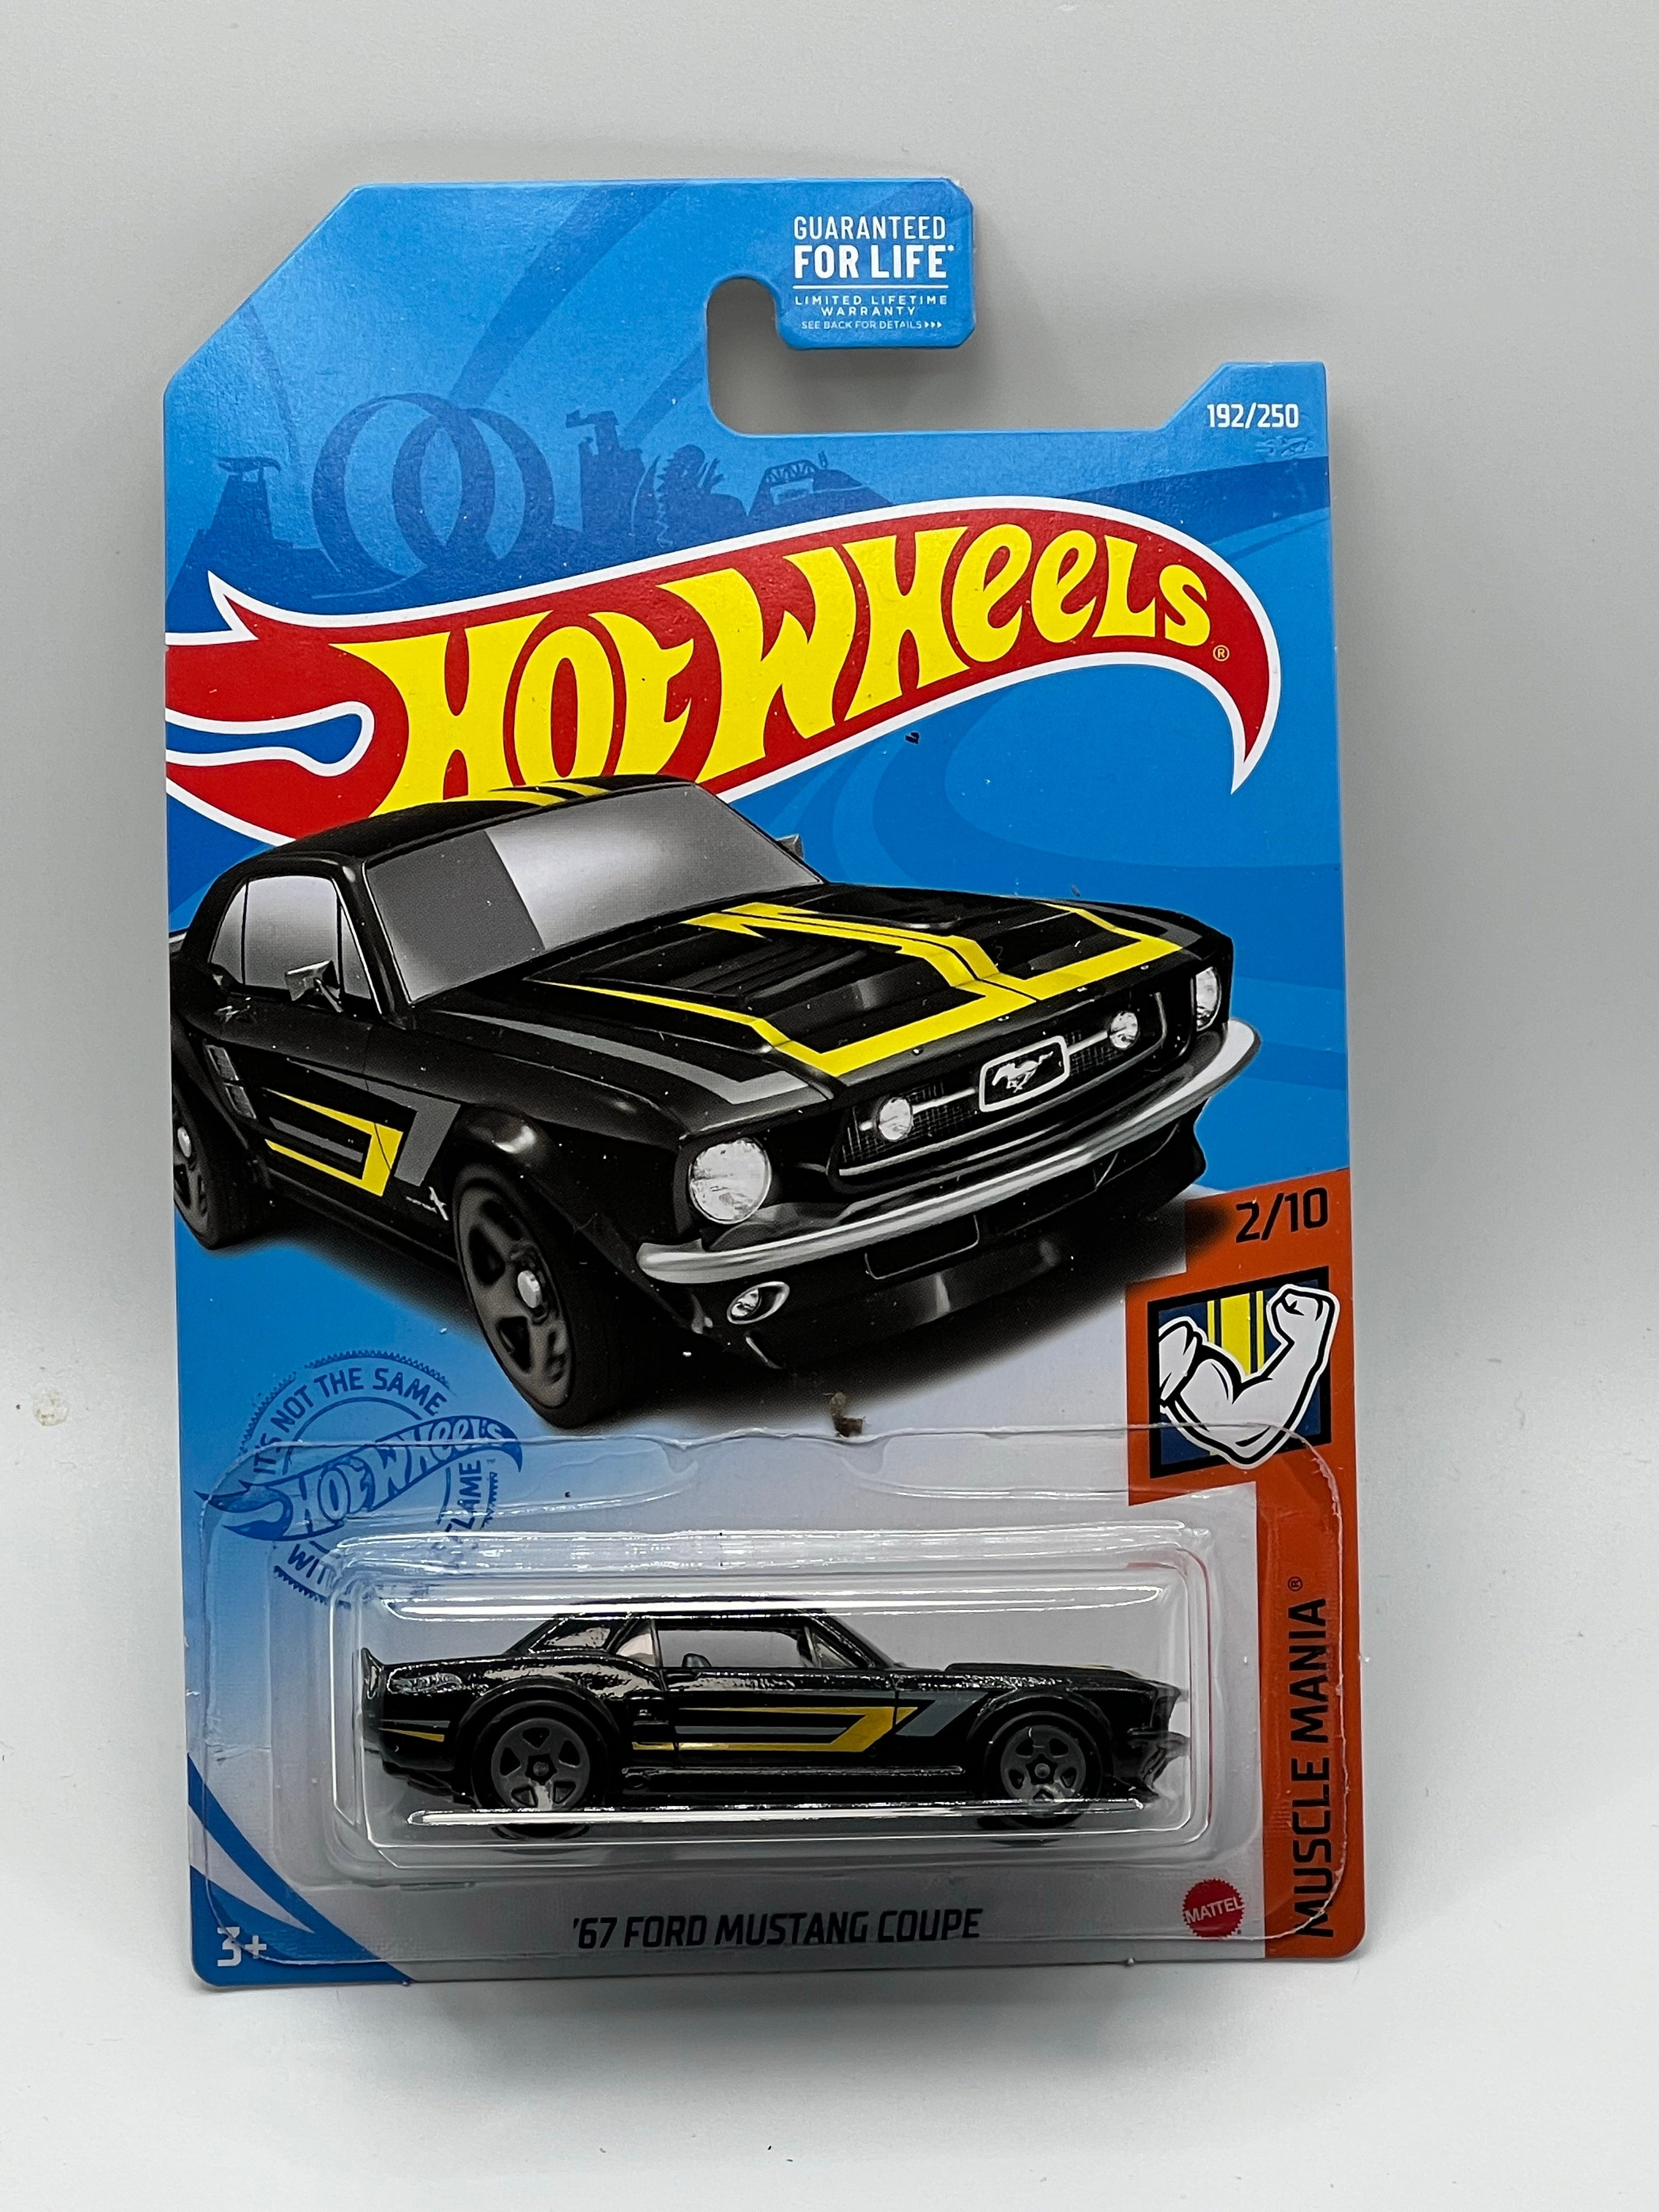 Details about   CHEVY SILVERADO OFF ROAD ZAMAC Hot Wheels 2019 Collector Edition WALMART Mail 